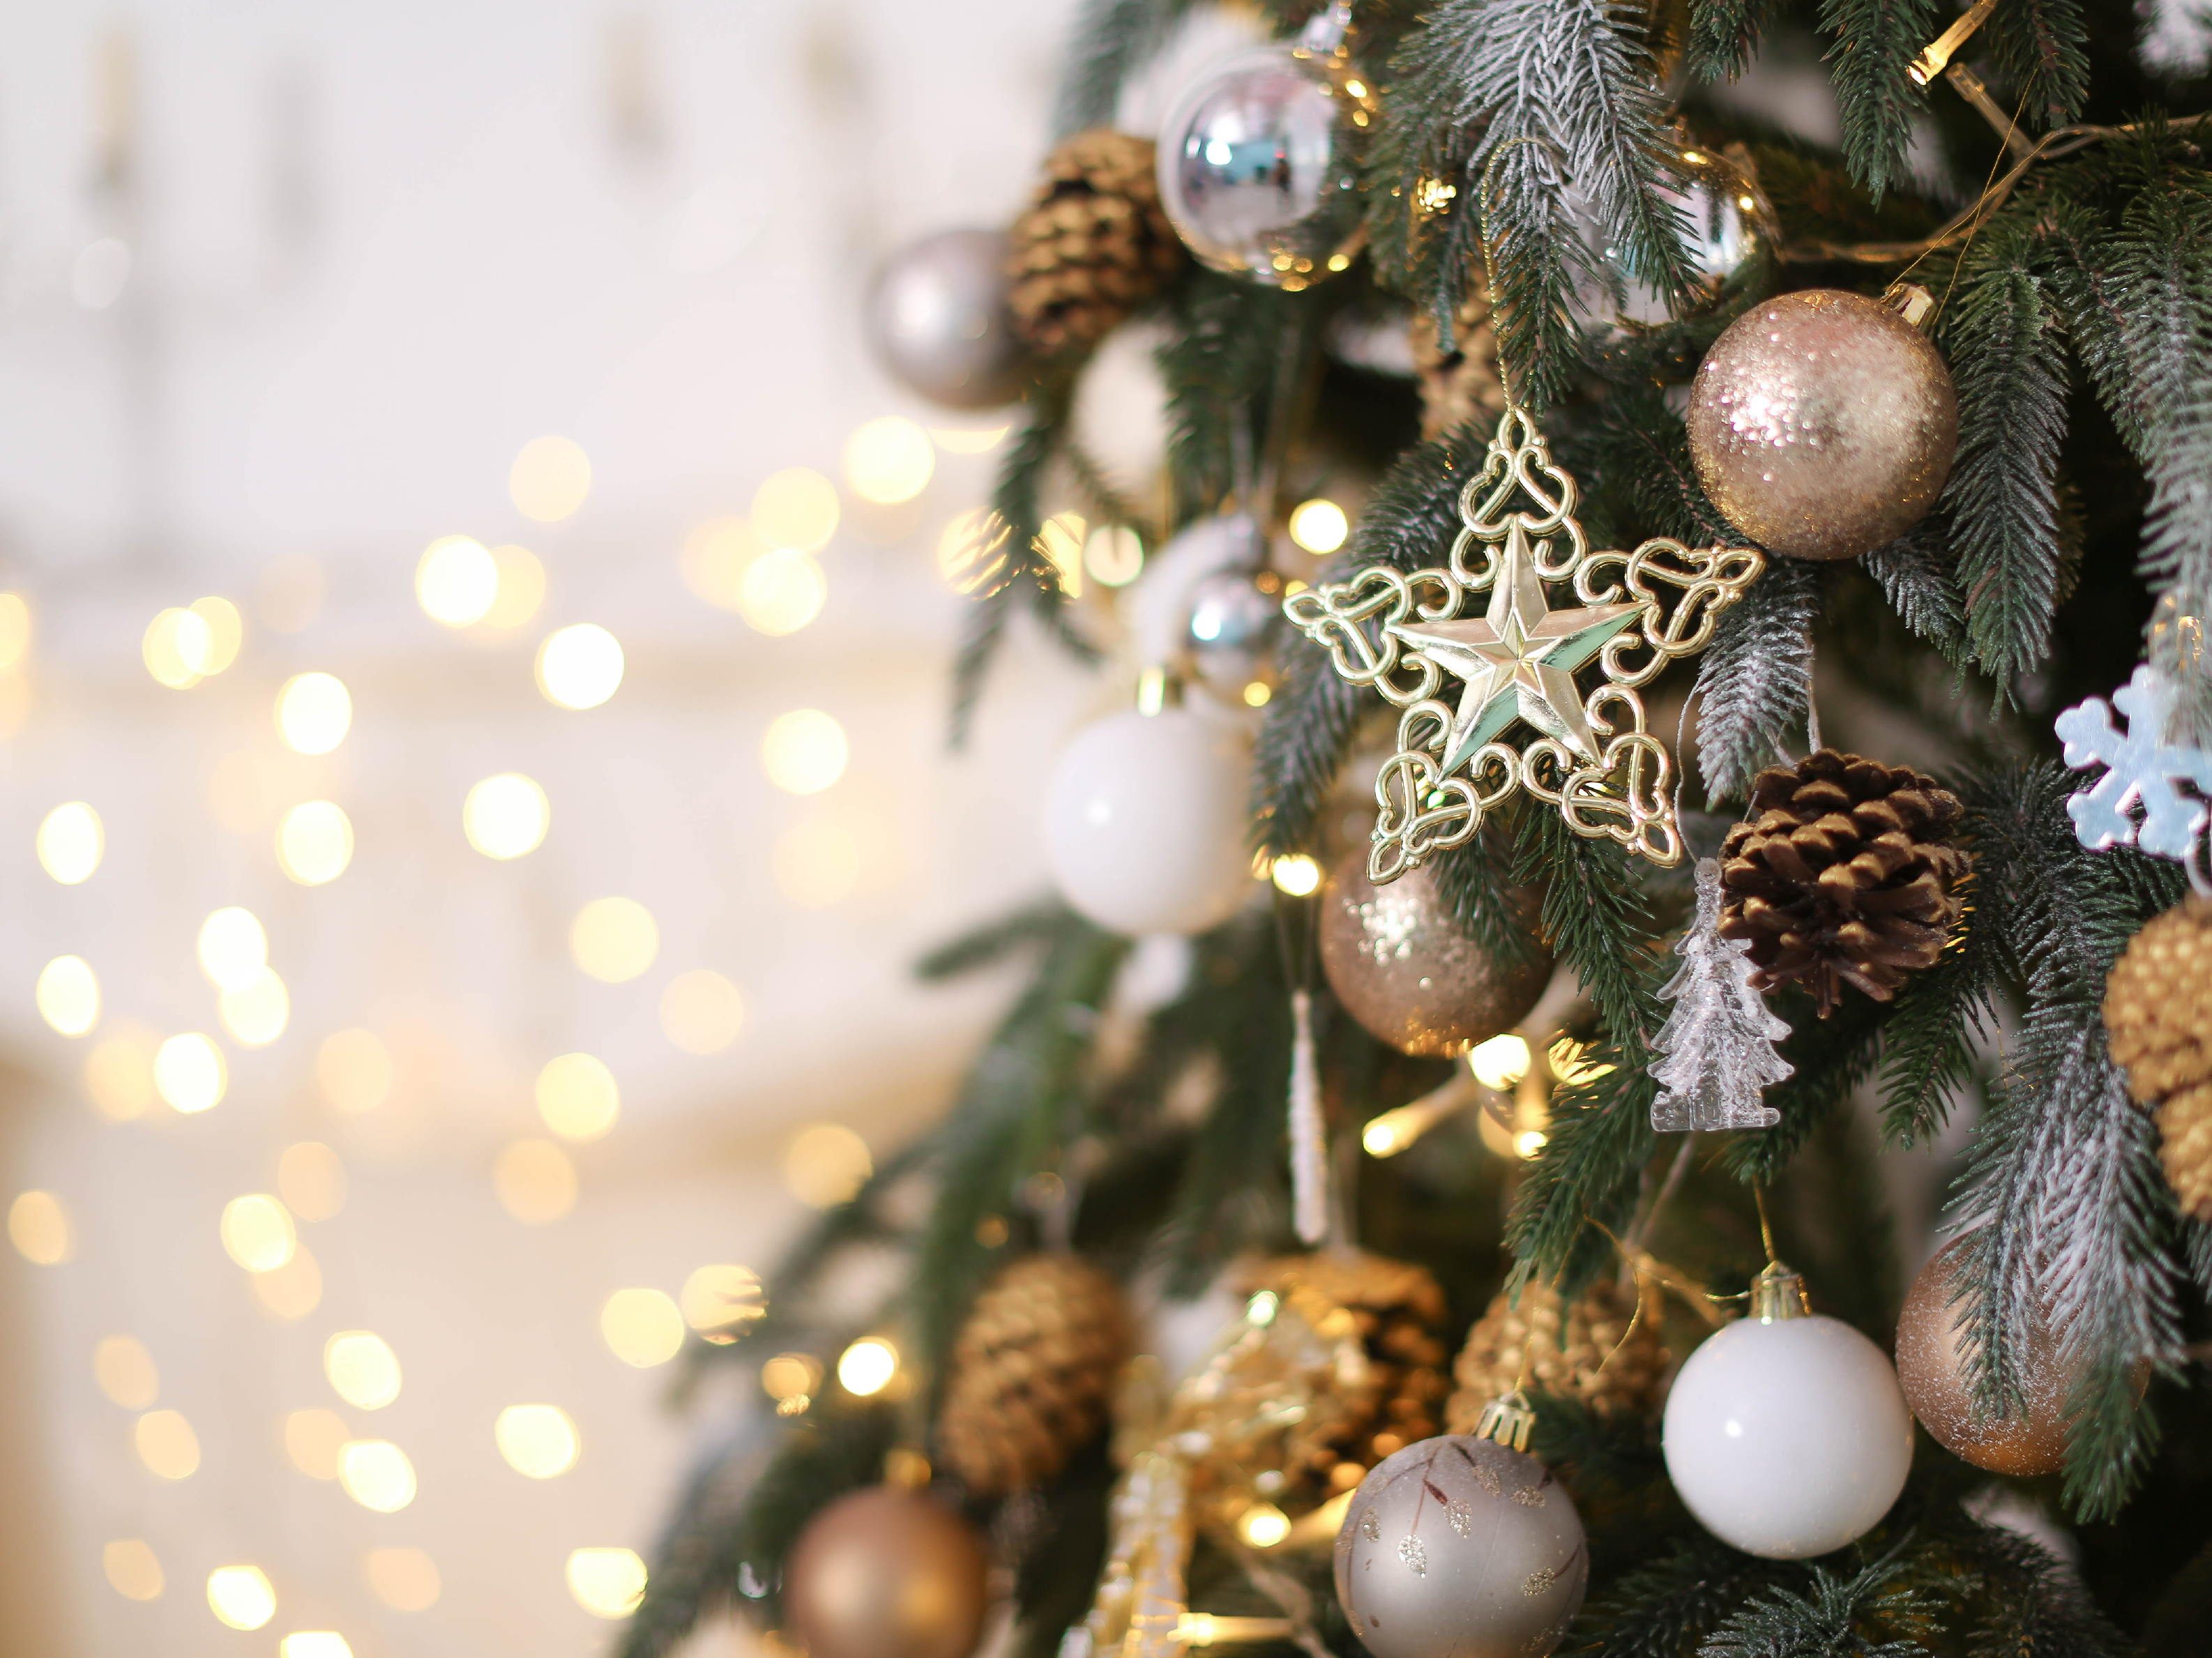 How to decorate a Christmas tree: Step-by-step guide